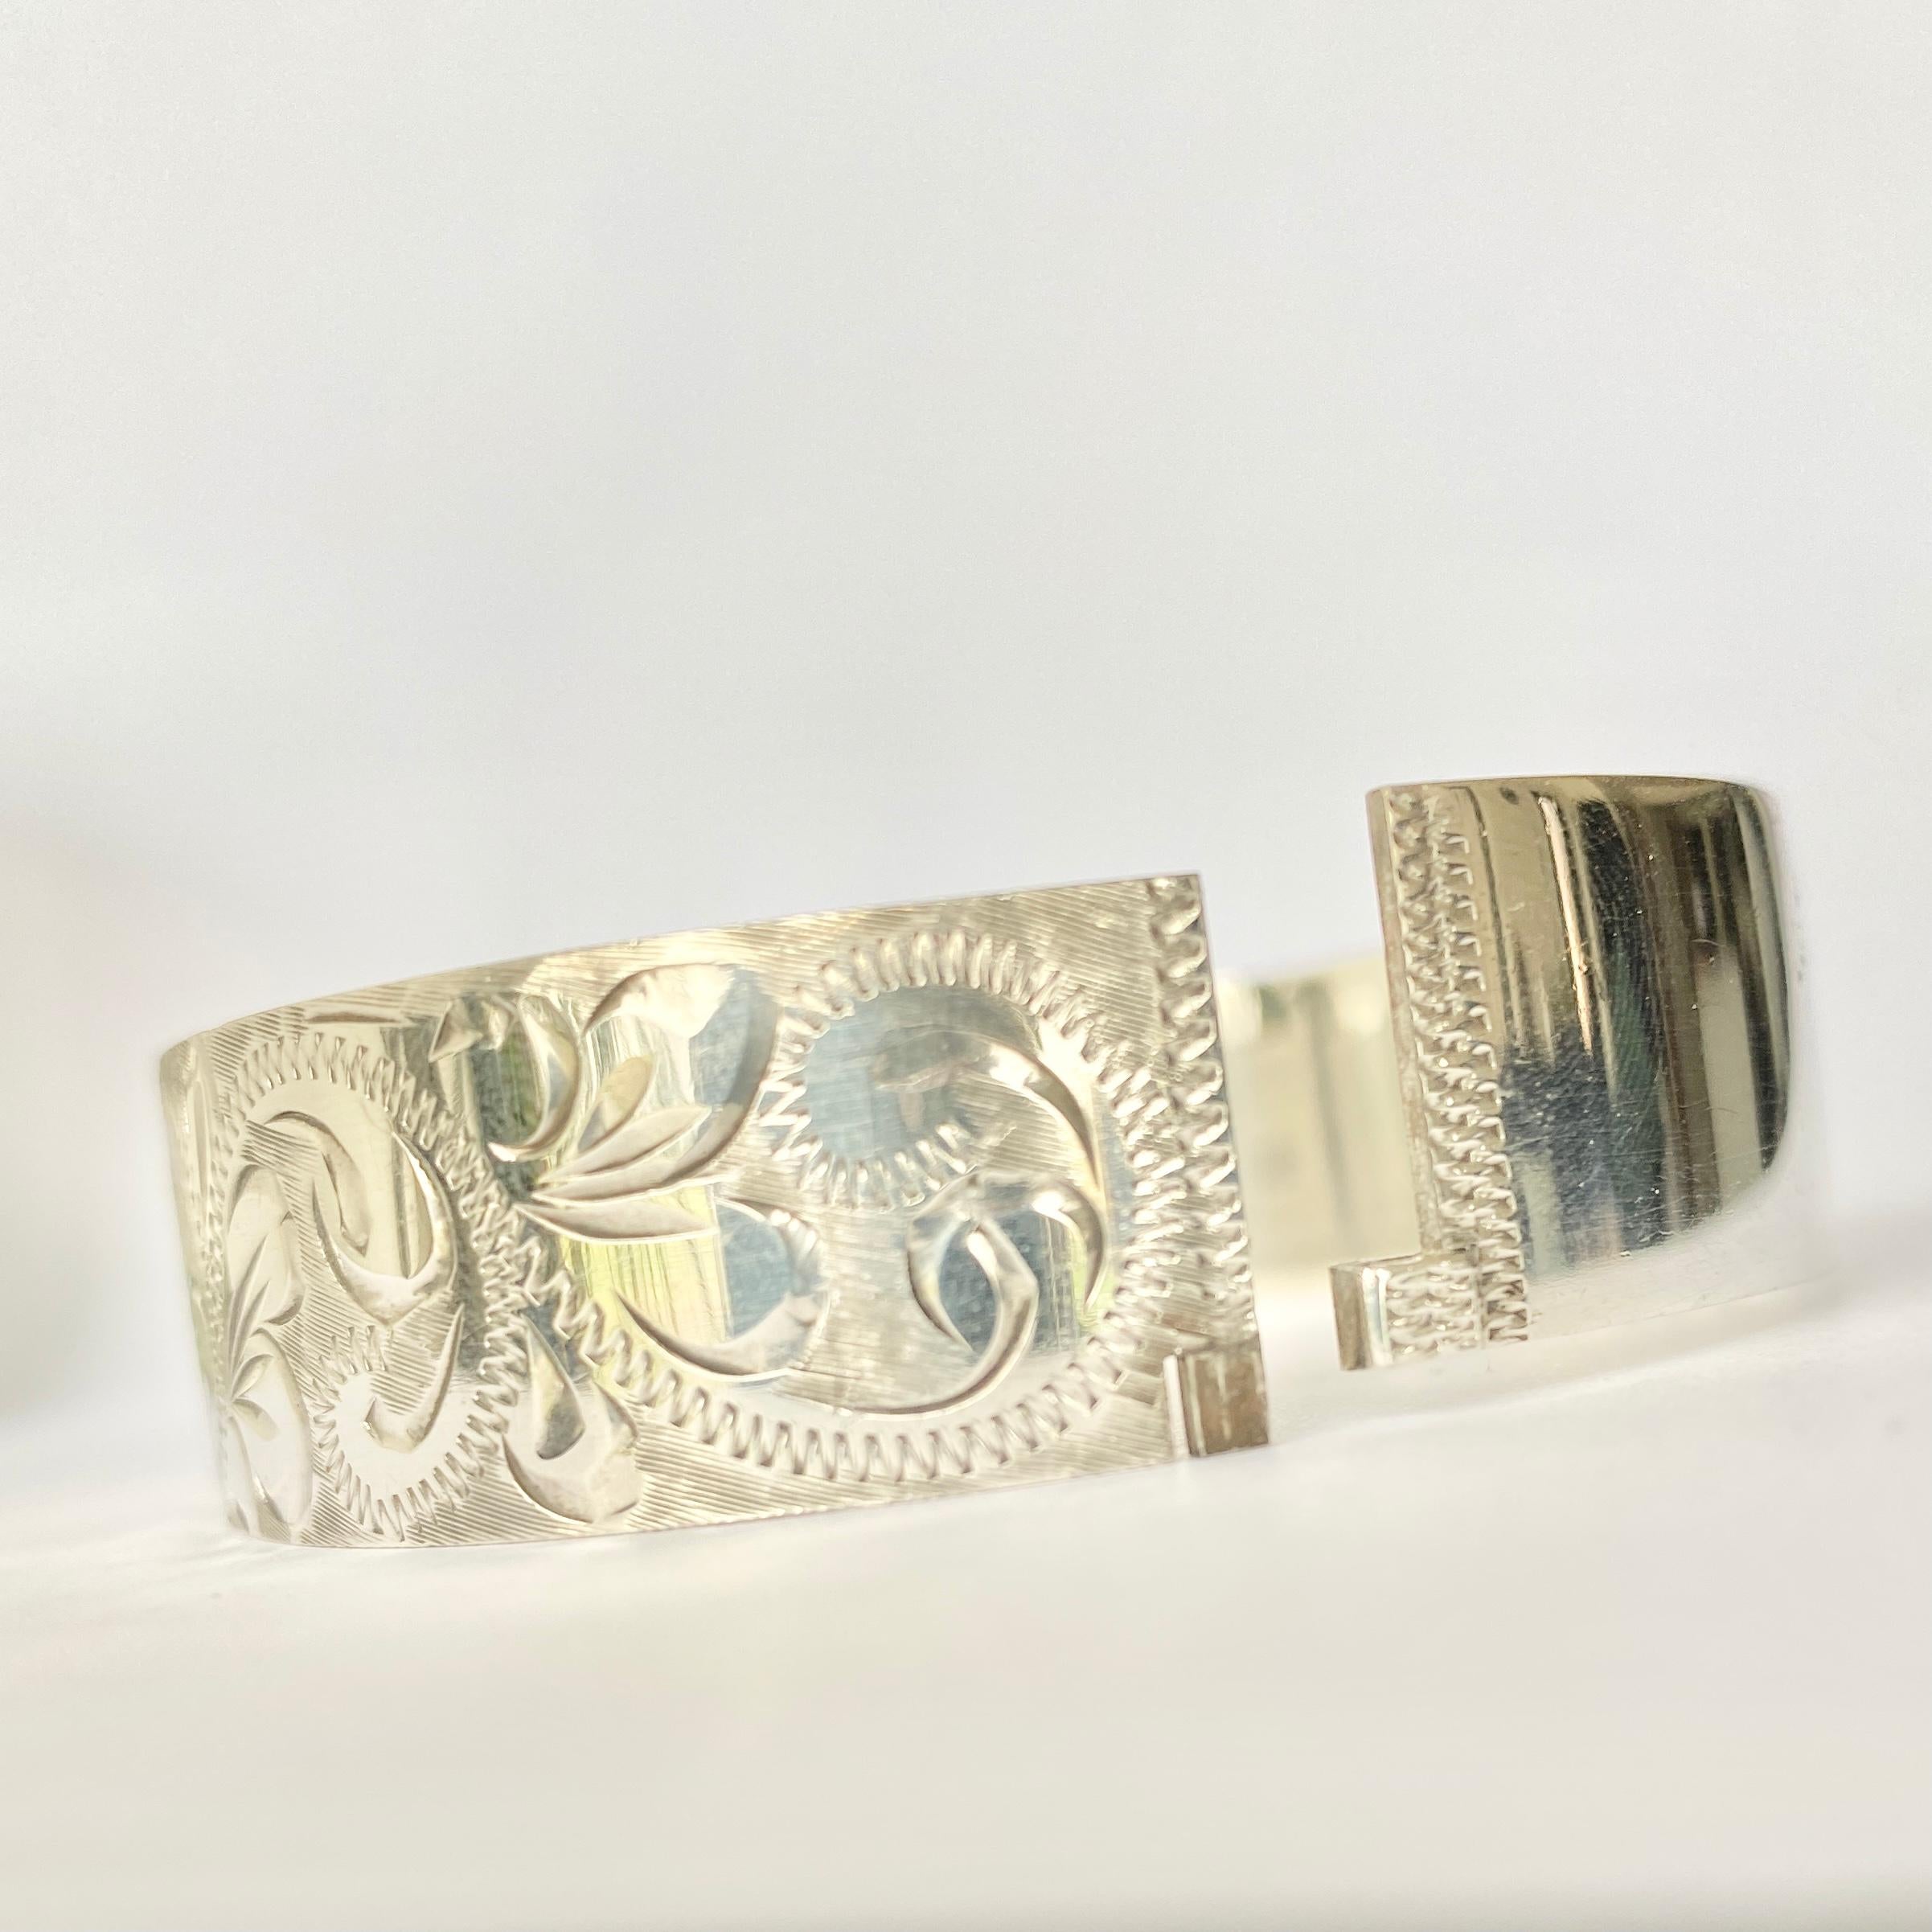 Deeply and intricately engraved on the front panel of this bangle is a classic swirl and textured design. Hallmarked Birmingham 1974. 

Inner Diameter: 60mm
Bangle Width: 16mm 

Weight: 35.9g